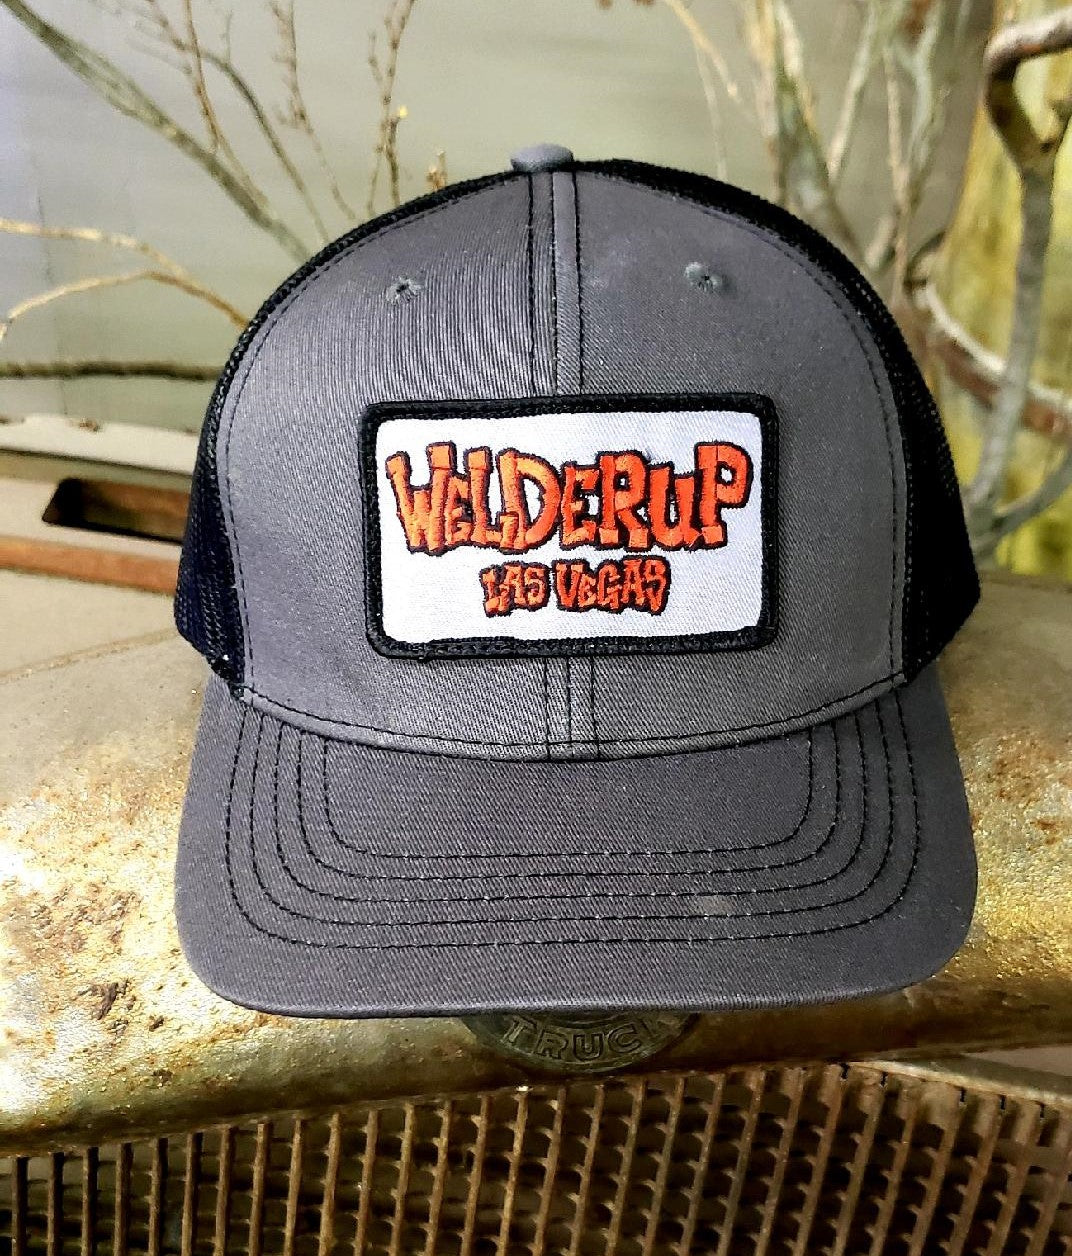 Welder Up Adjustable Patch Hat in Gray with Black Mesh Back